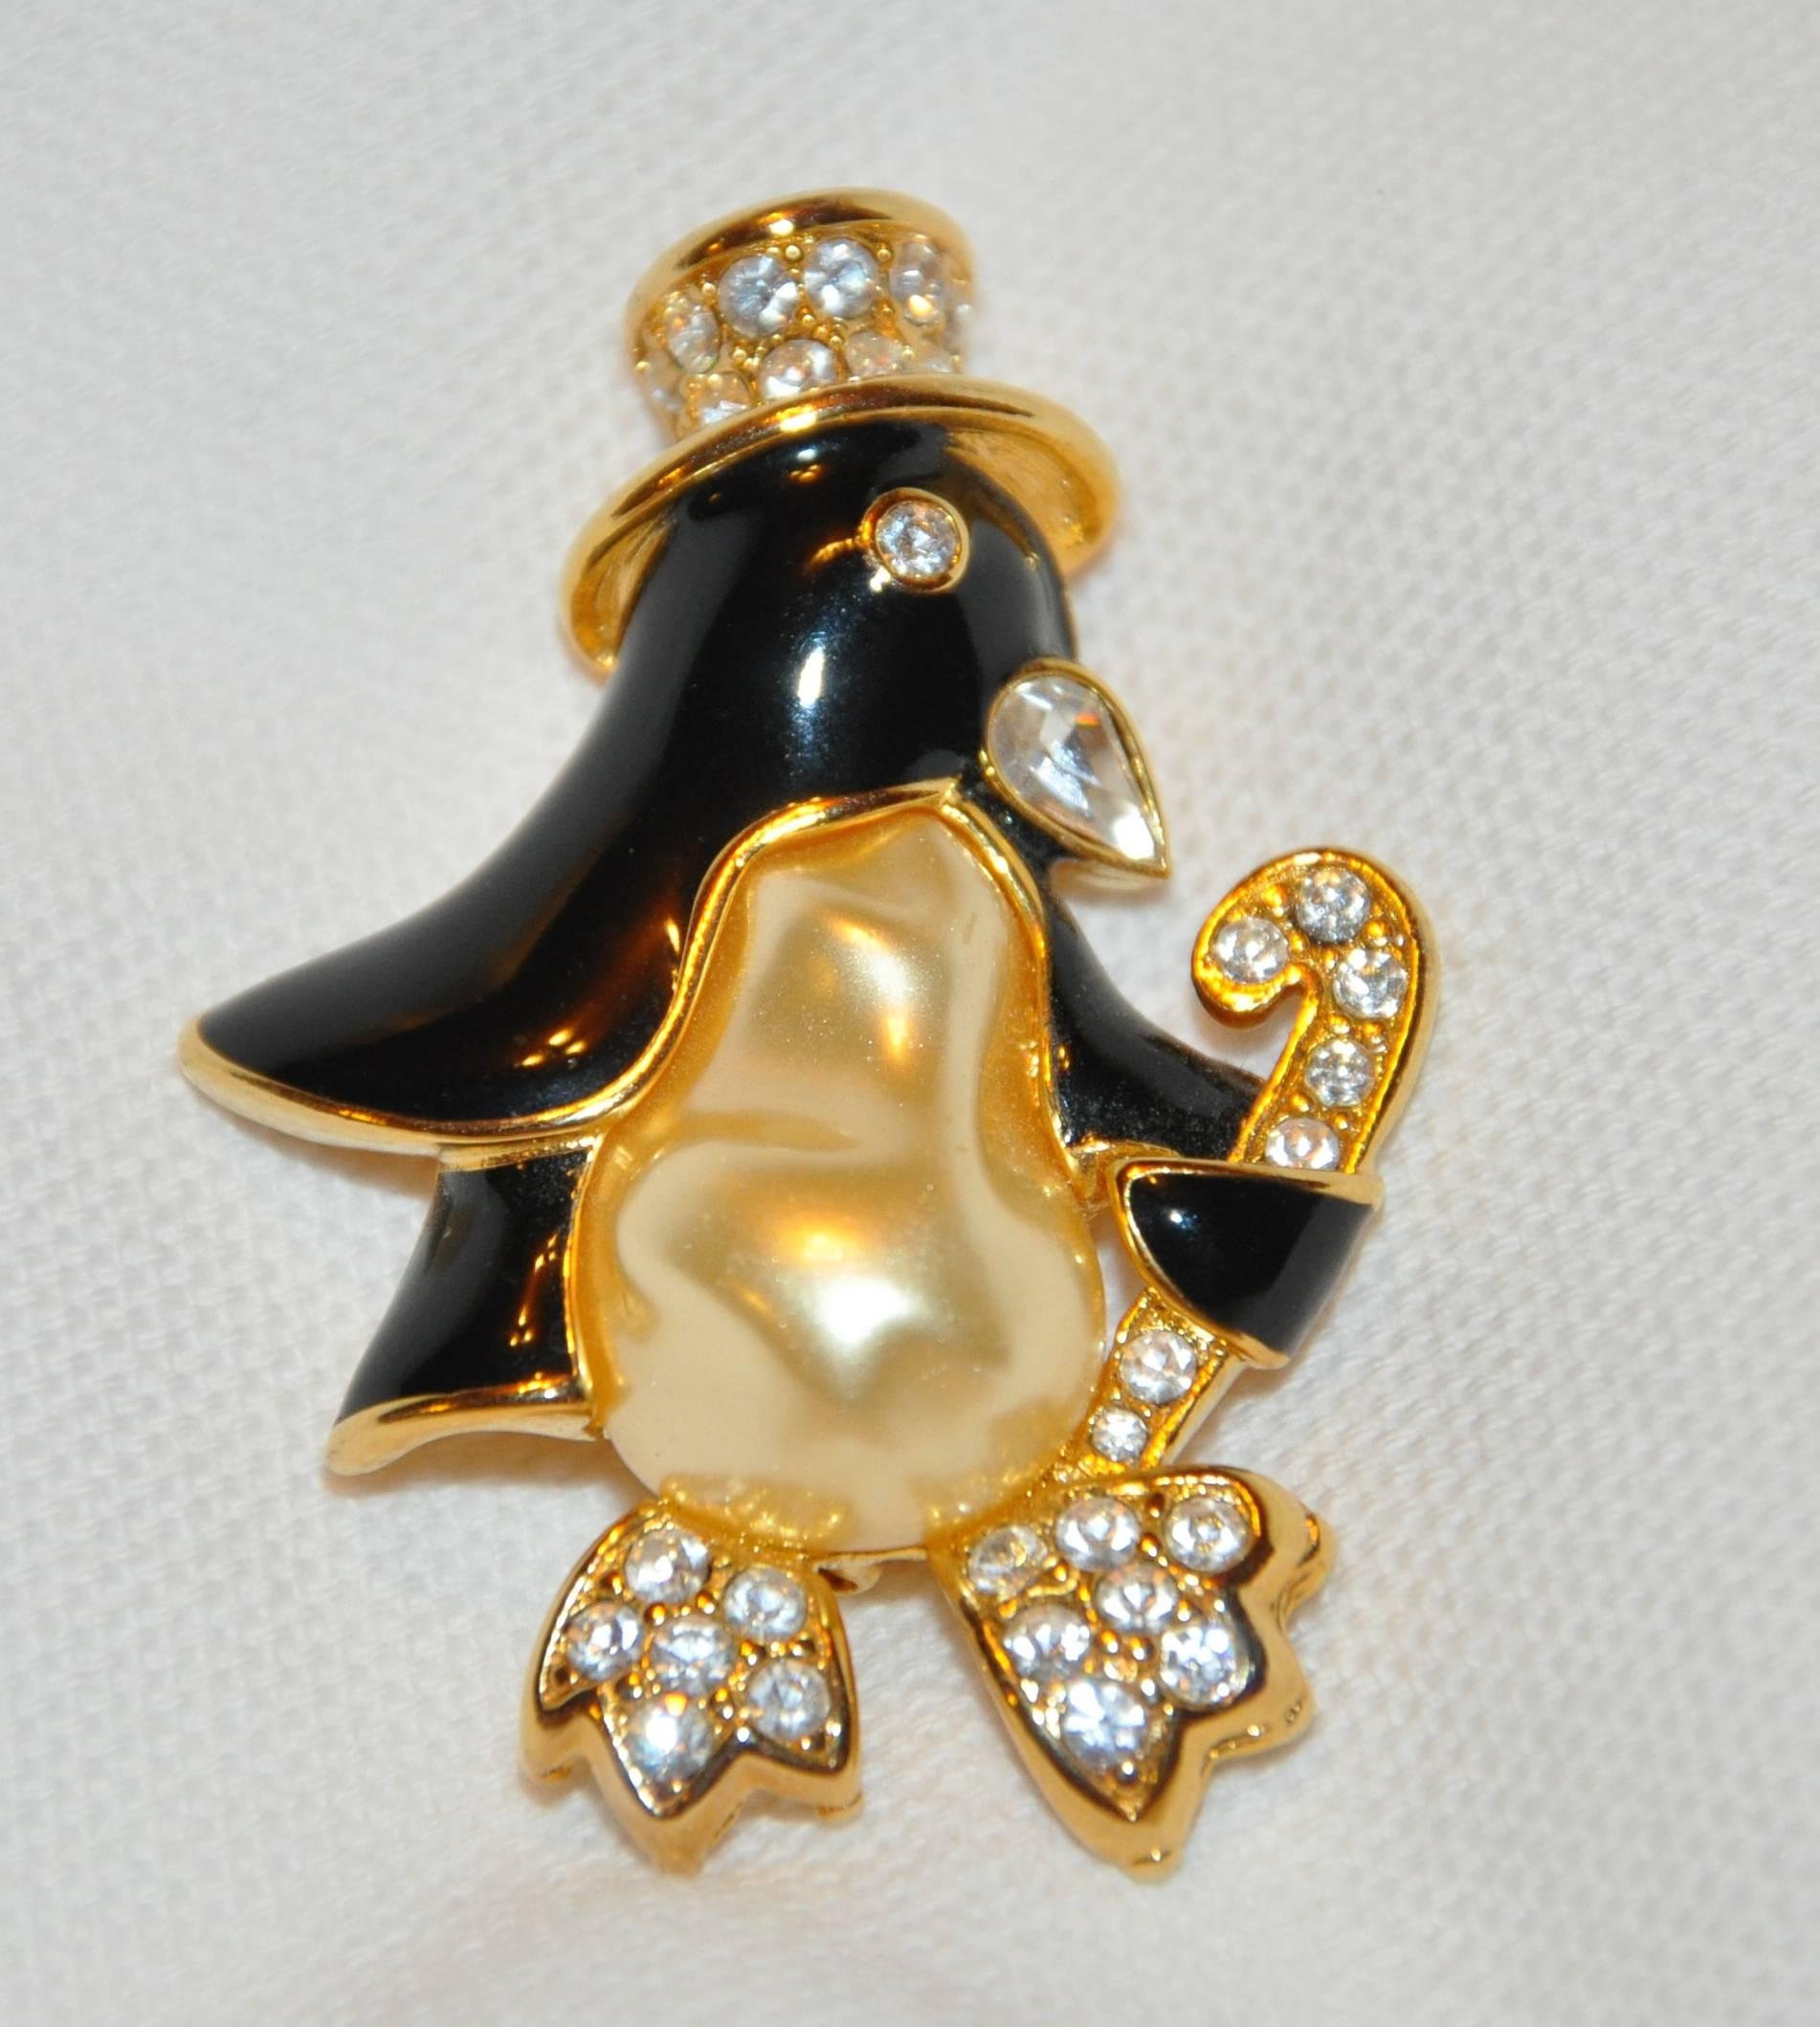        Kenneth Jay Lane's wonderfully whimsical large penguin set in polished gilded gold vermeil hardware with black enamel and highlighted with a large faux pearl and faux diamonds. This wonderful brooch measures 2" x 1 1/4", made in